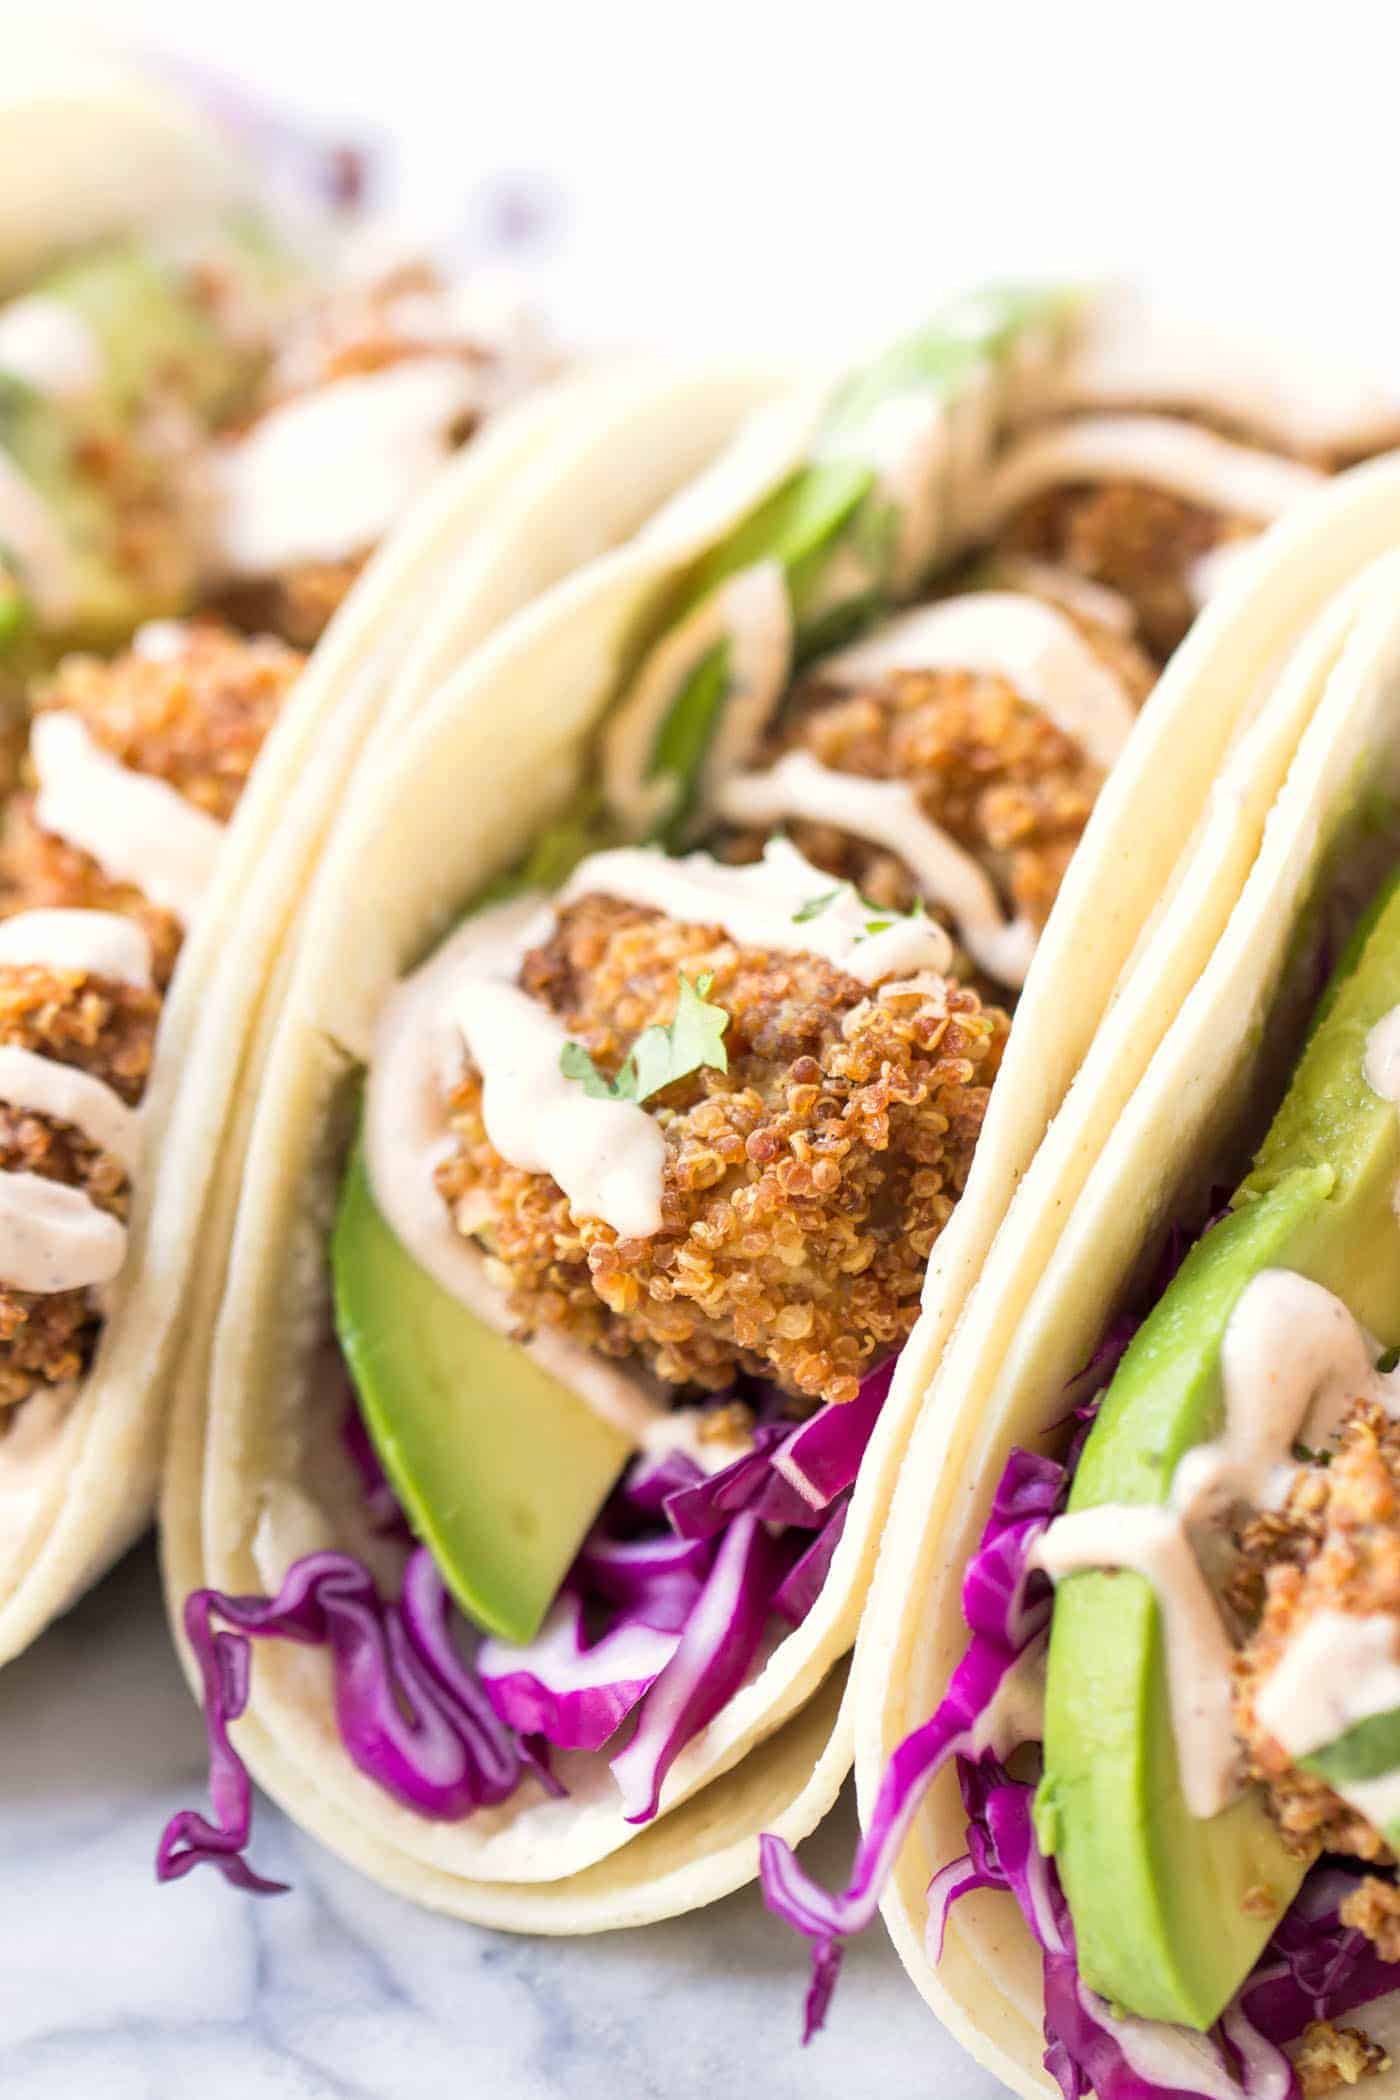 CRISPY TOFU TACOS! made with quinoa crusted baked tofu and served with a vegan lime crema!